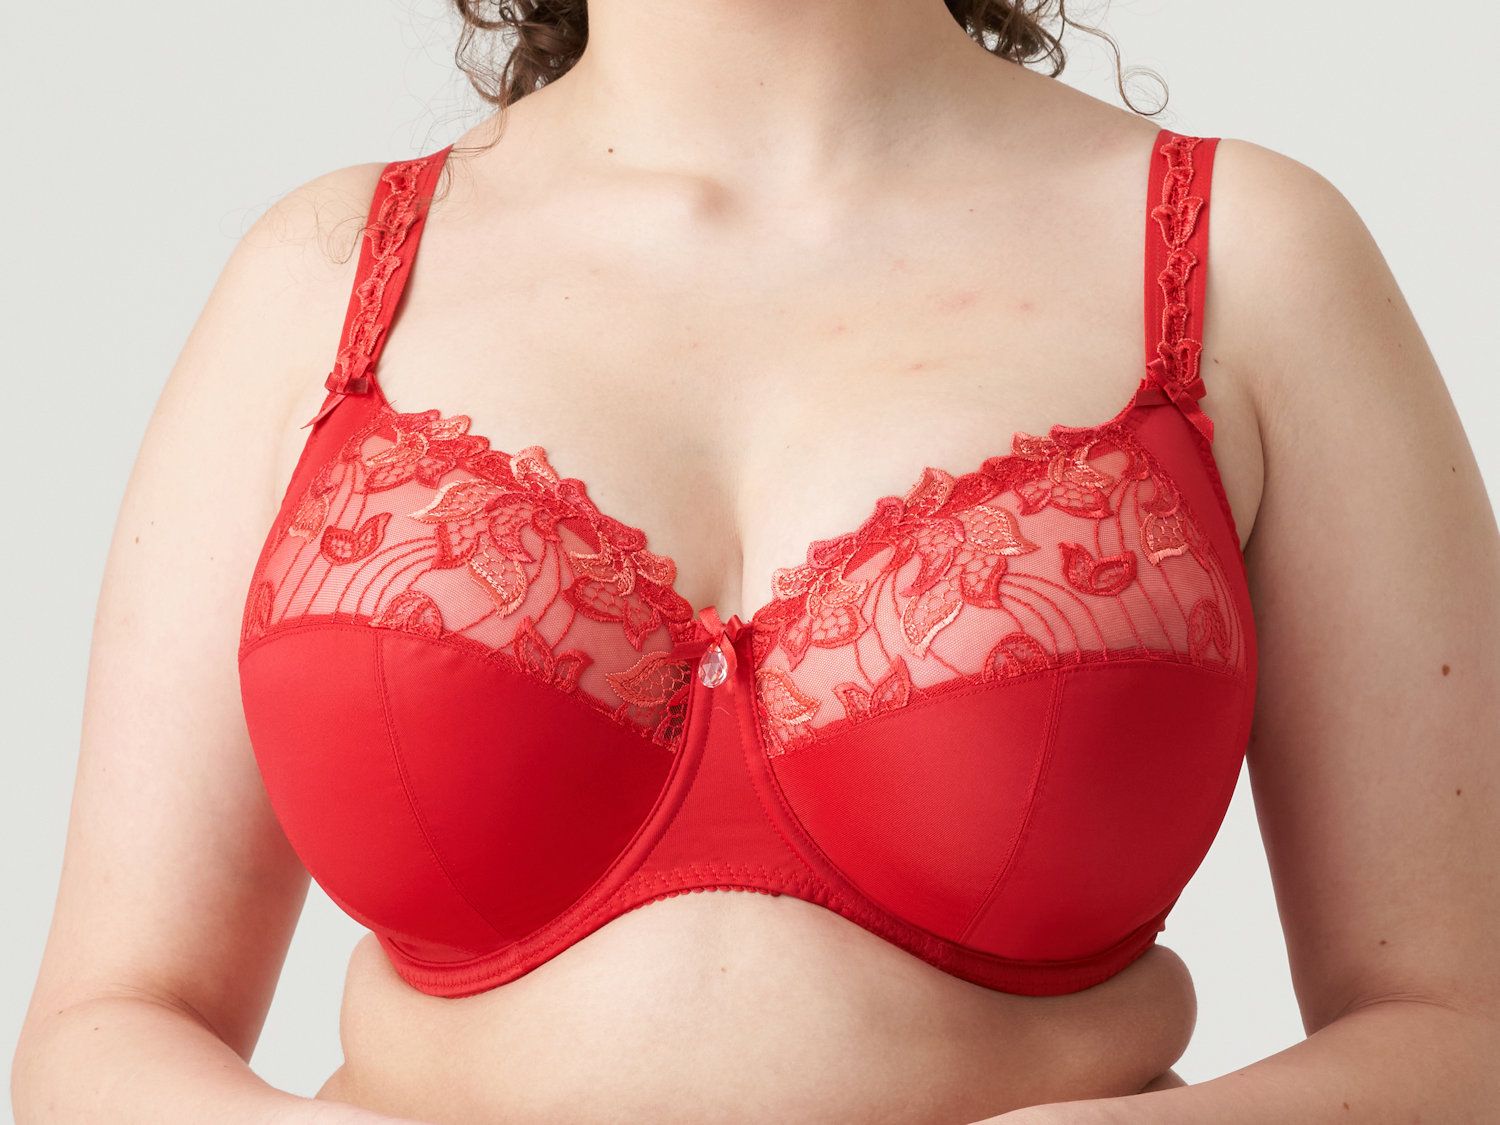 L, M, K, J Cup Sizes Lace Underwire Bras for Large Breasts